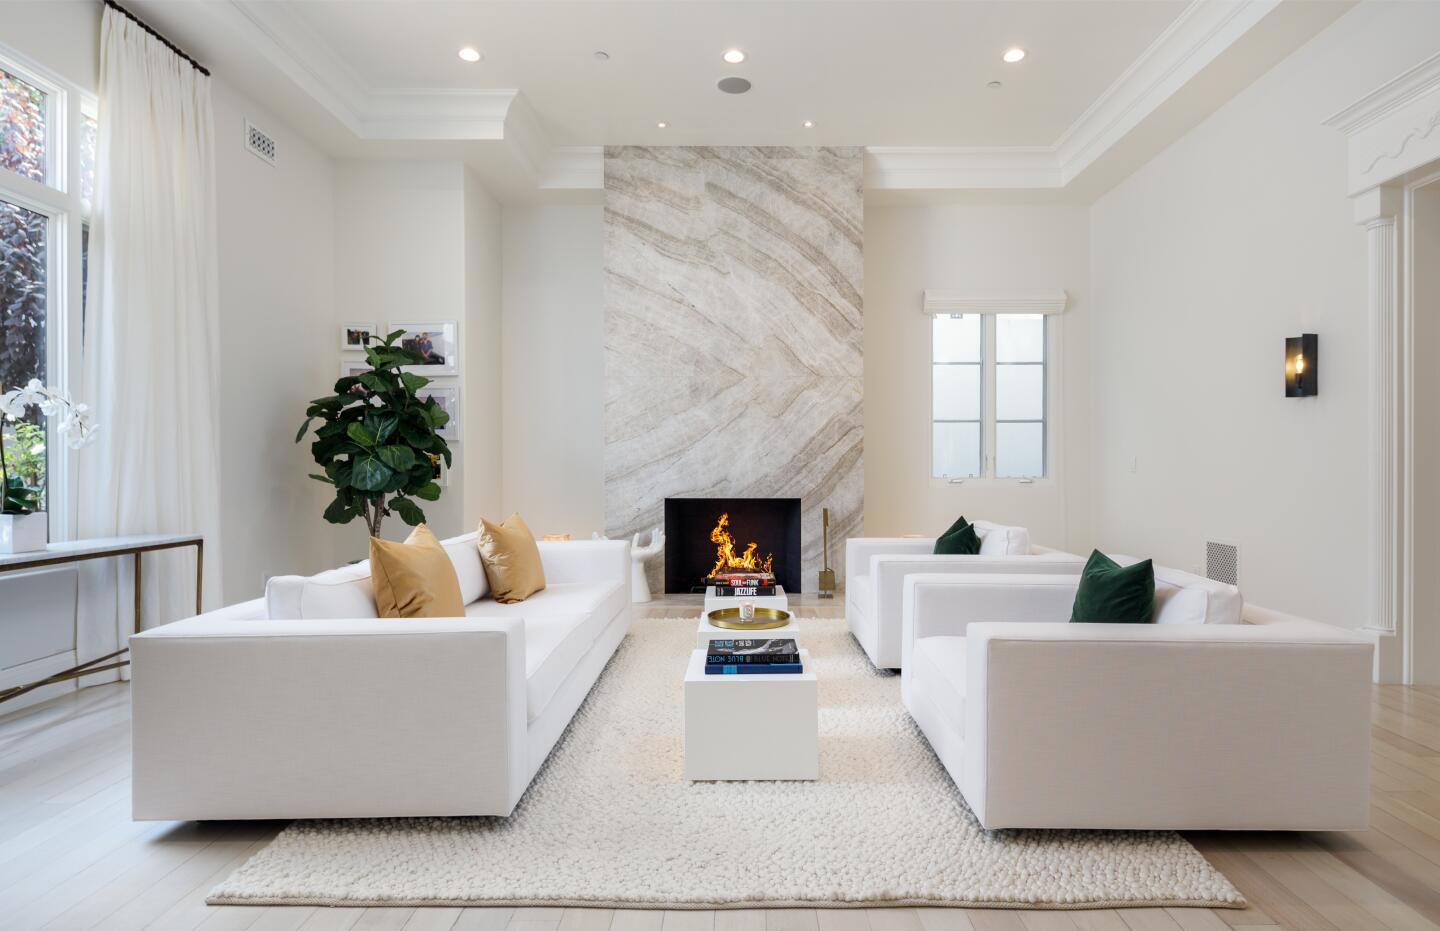 A dramatic floor-to-ceiling fireplace is a room's centerpiece.